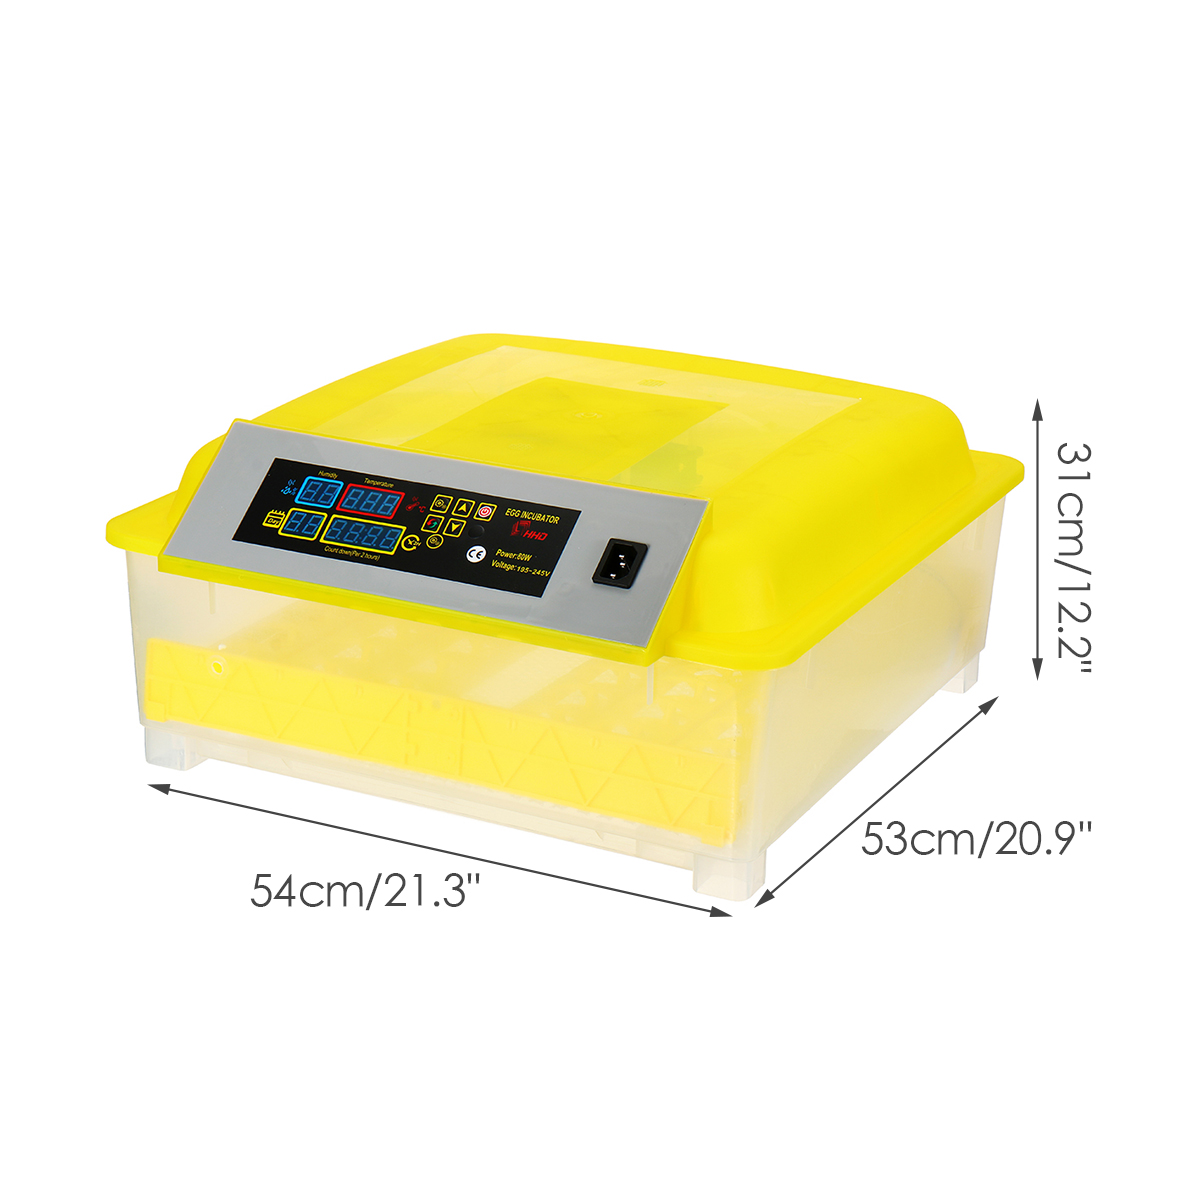 Automatic-48-Egg-Incubator-Home-LED-Candling-Chicken-Duck-Hatcher-Pigeon-Quail-1716325-5